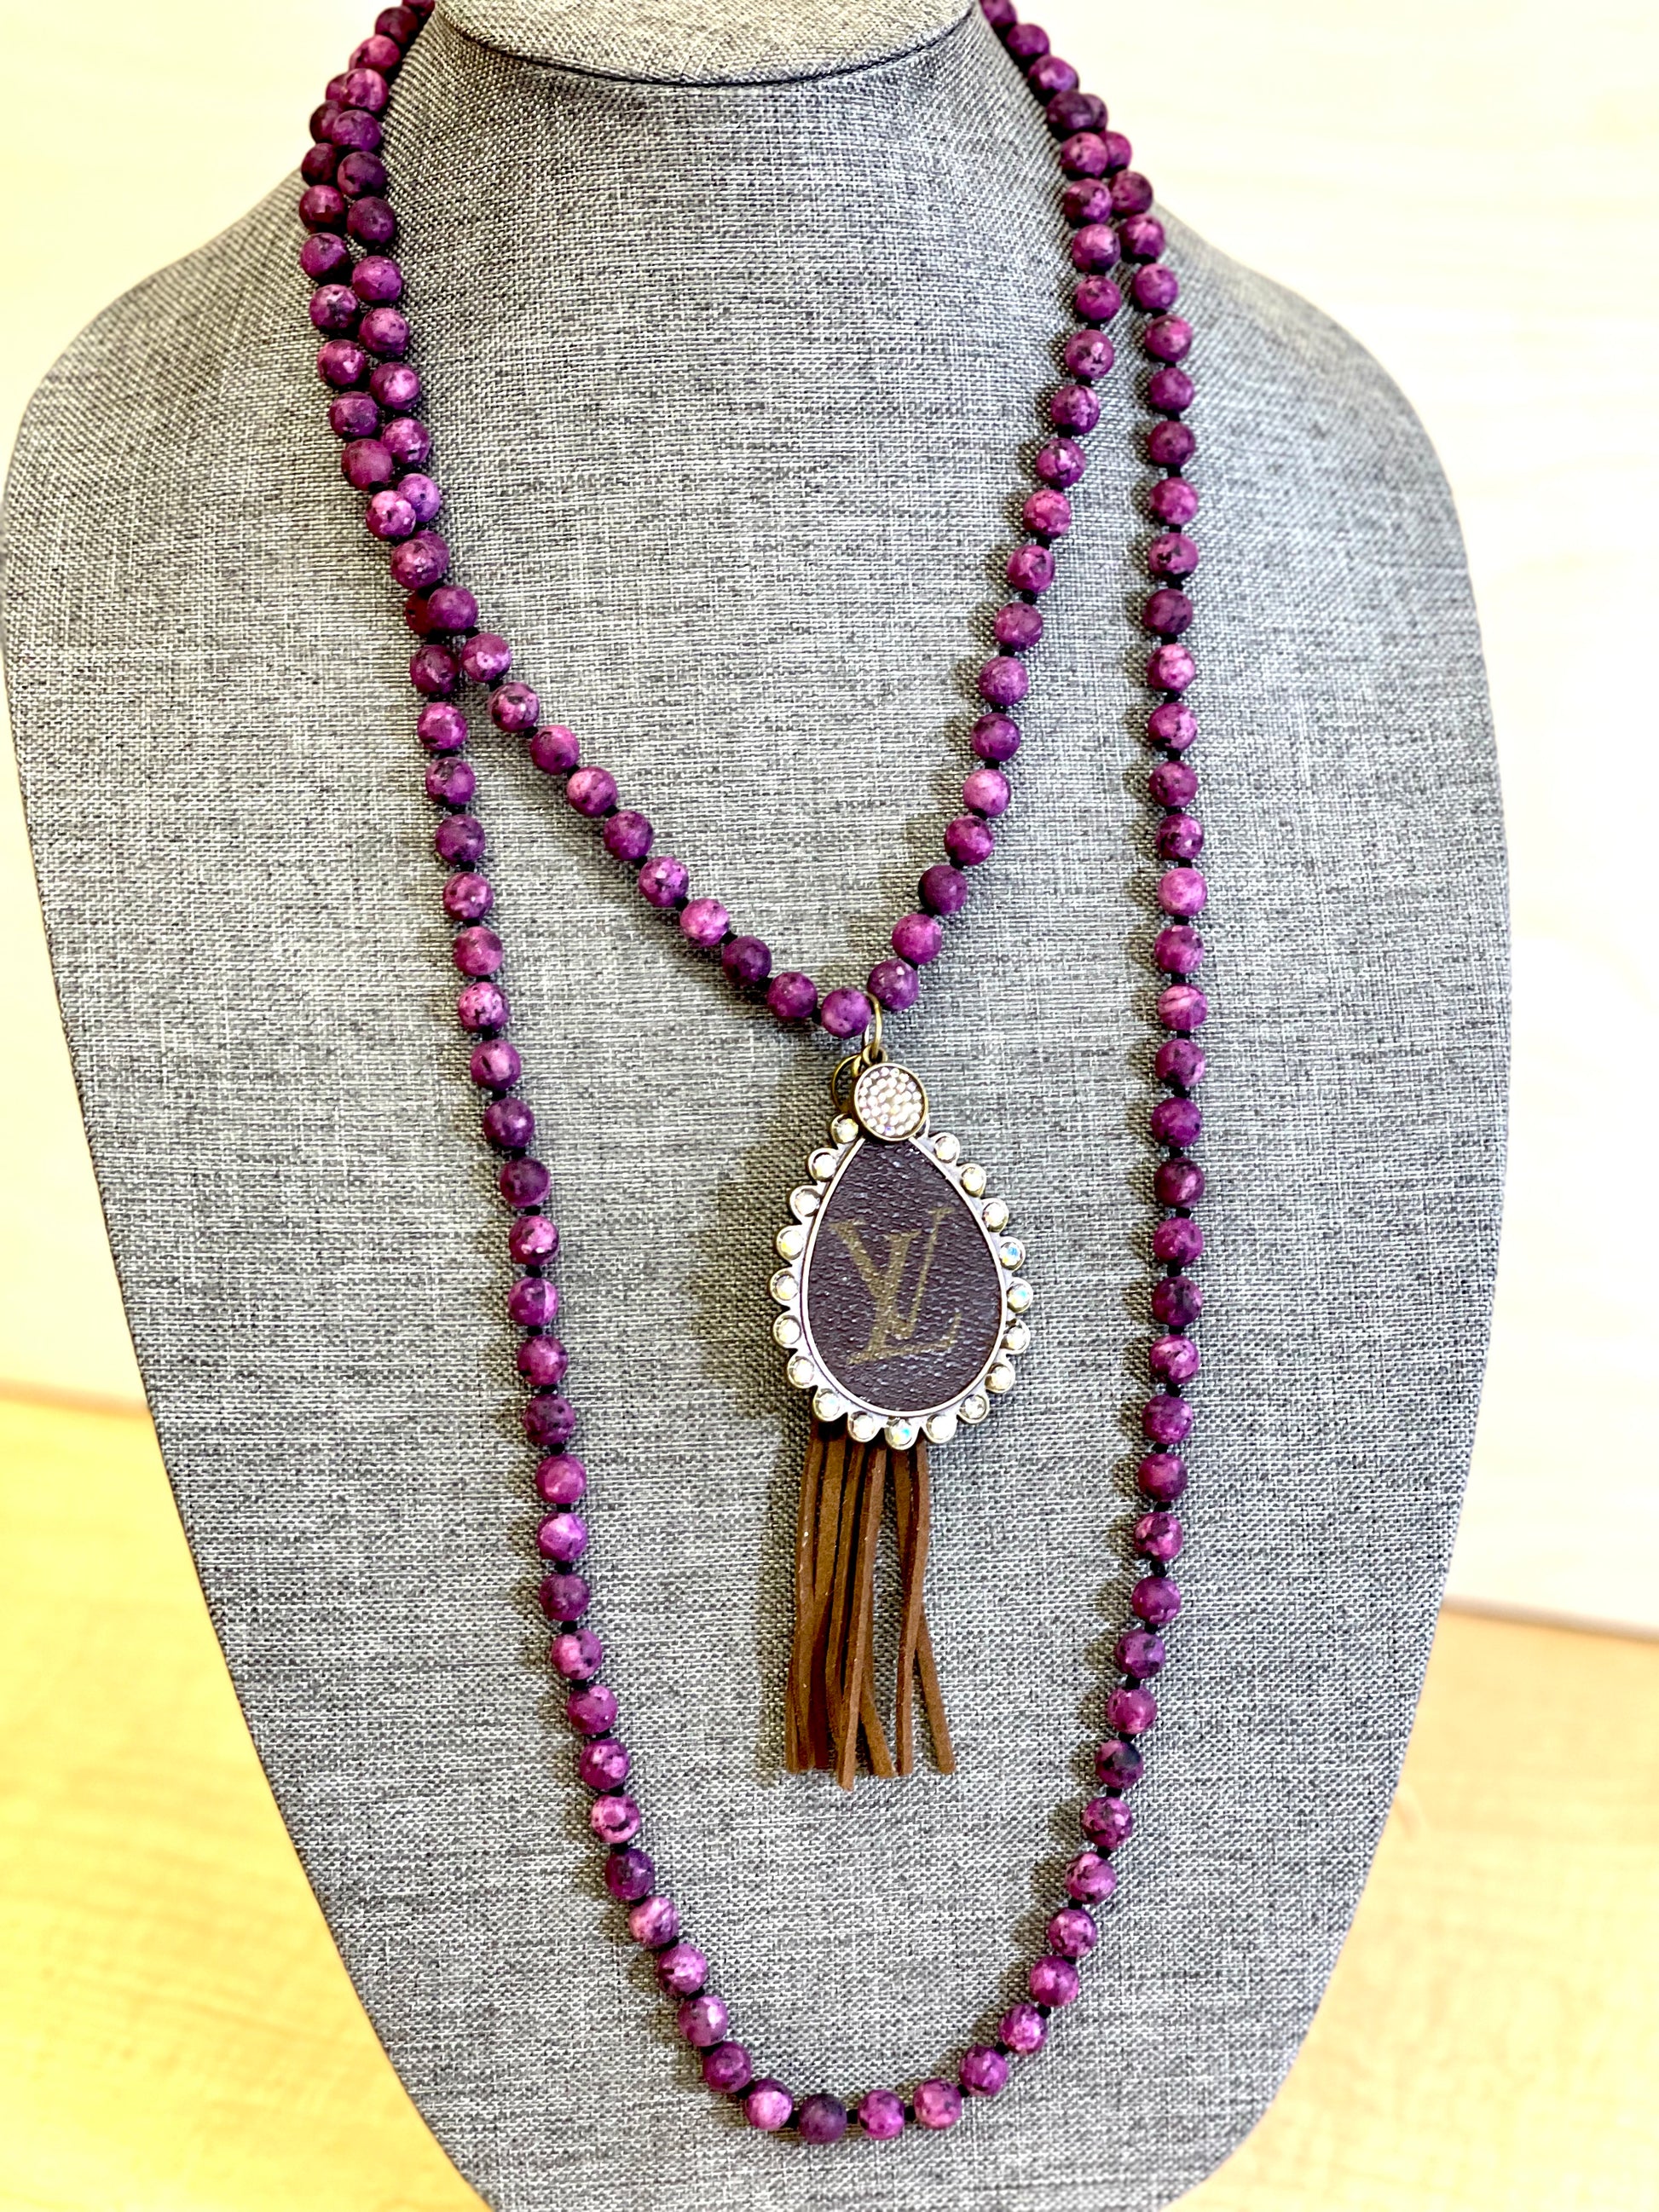 Stone- Pink/purple necklace with large teardrop pendant - Patches Of Upcycling